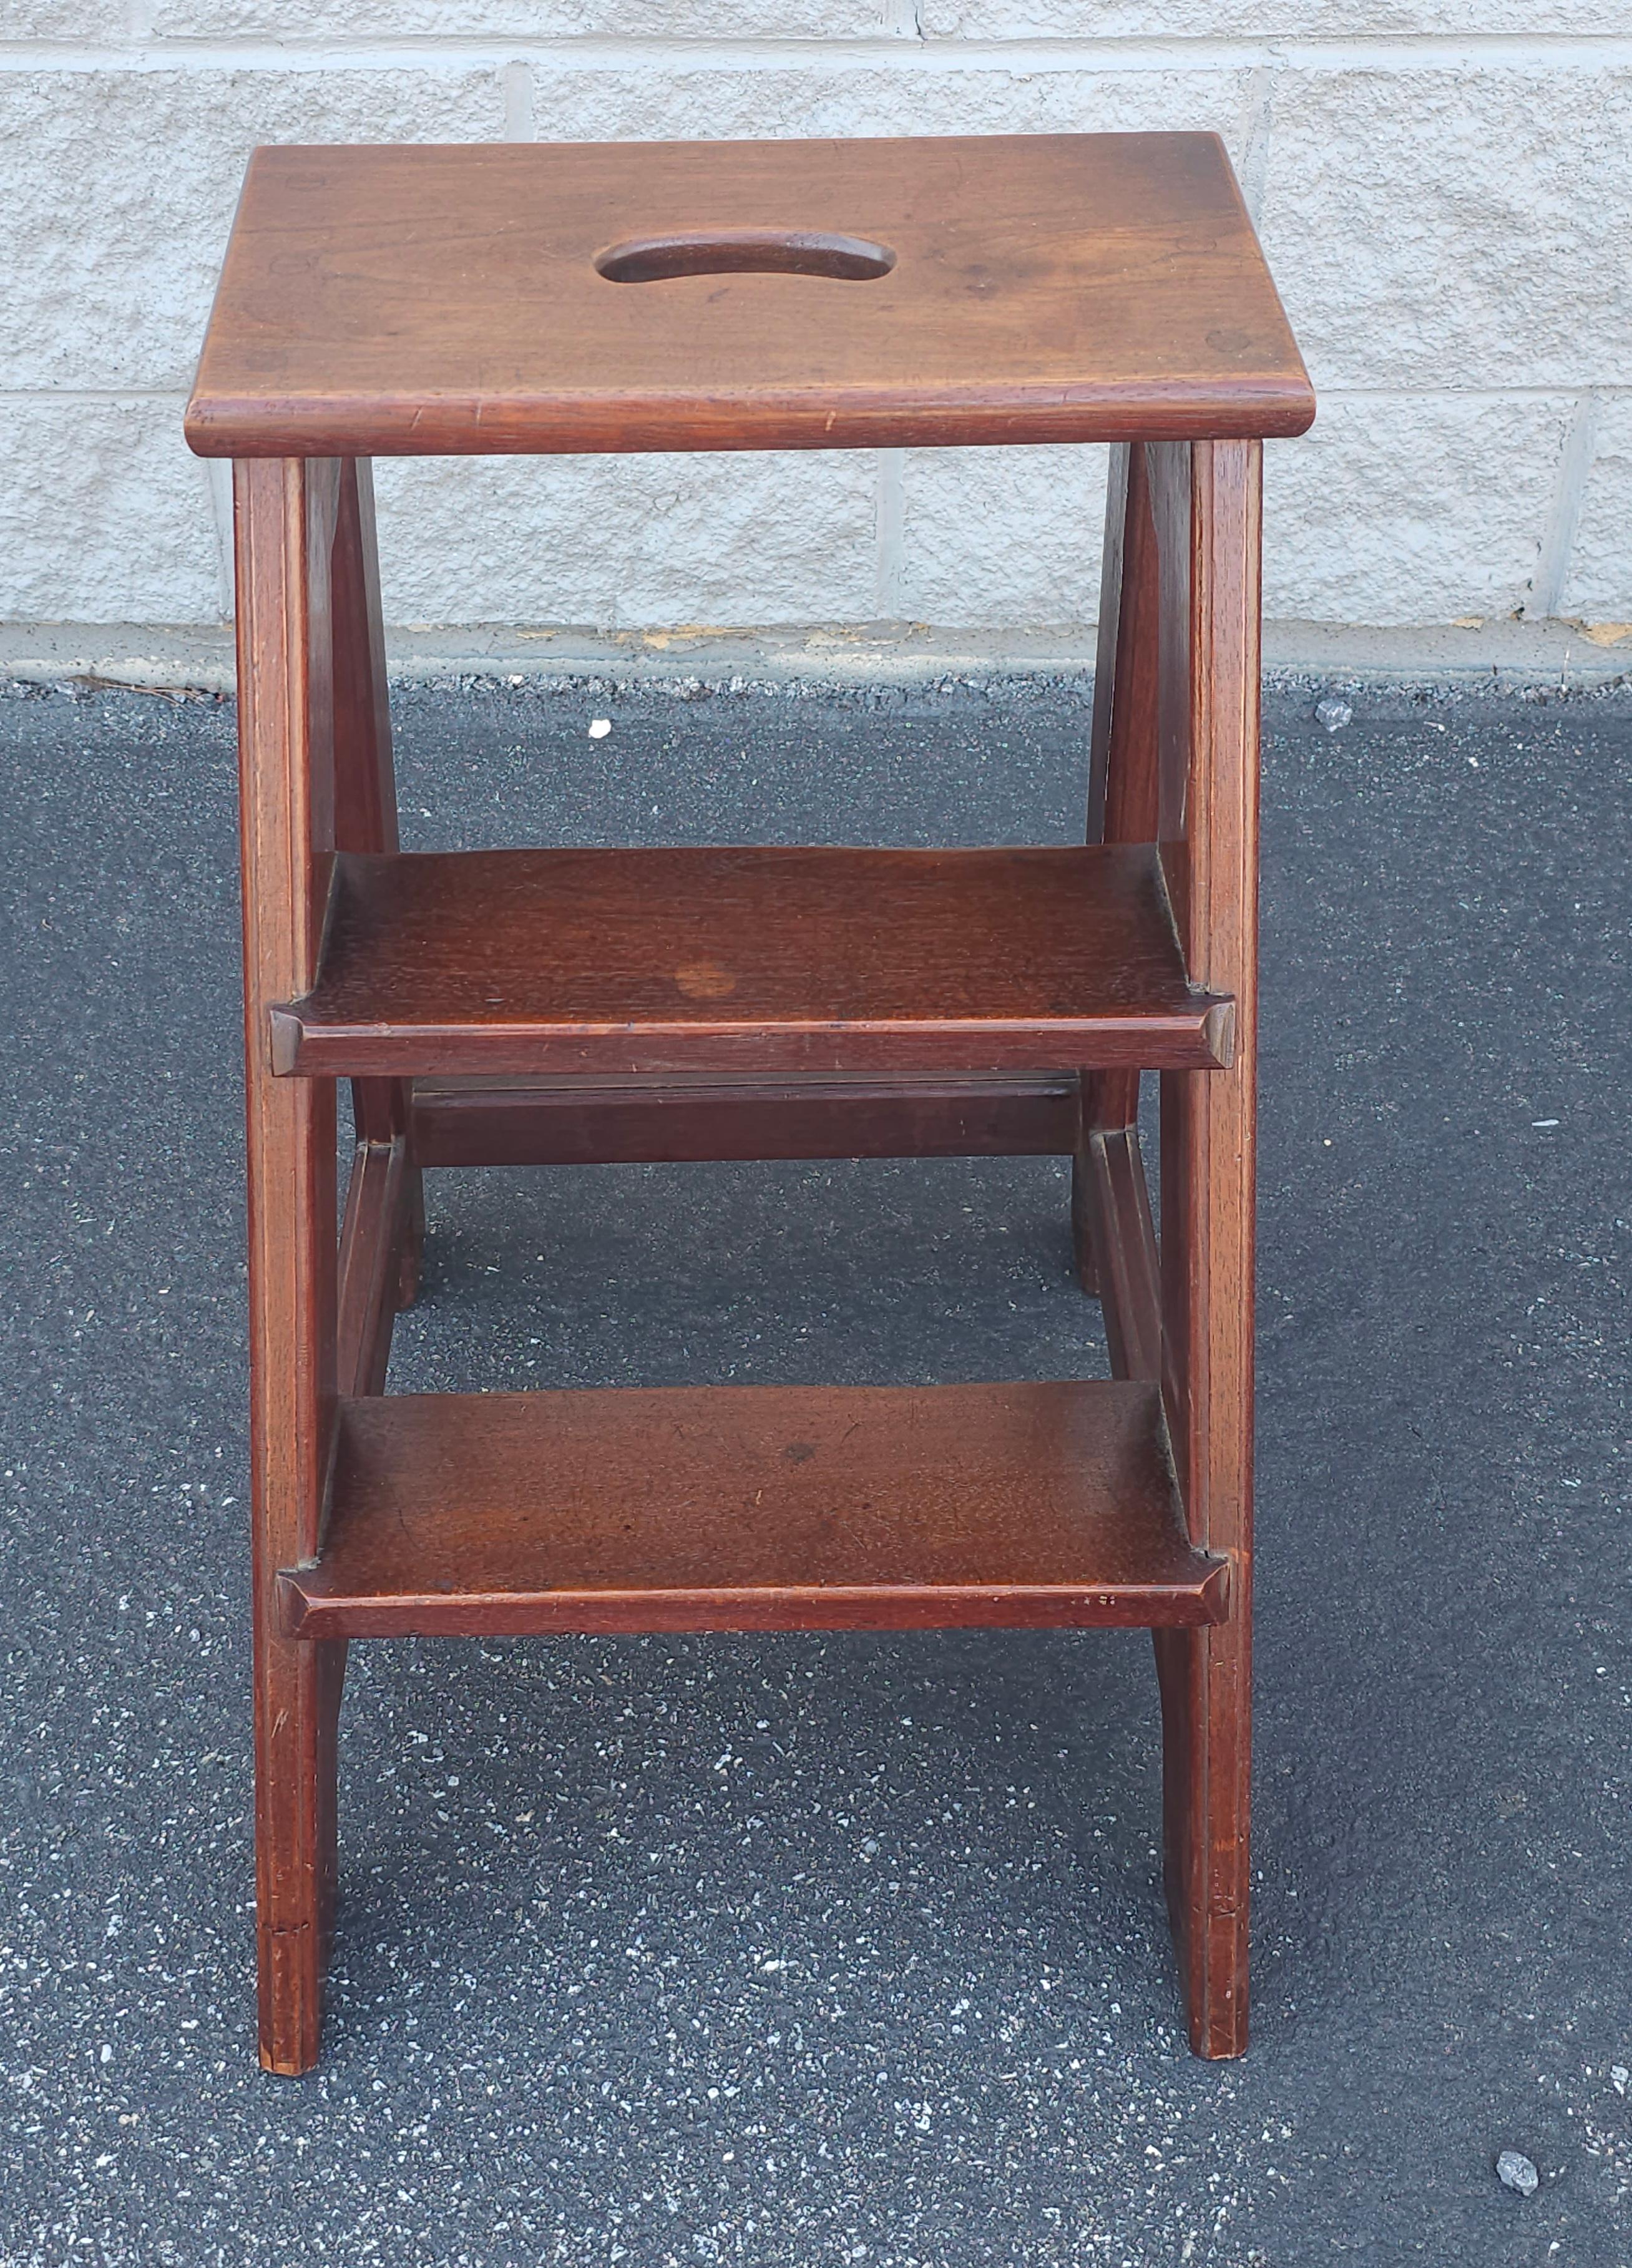 An early to Mid 20th Century Magogany rock solid Library Step Ladder with top handle. Measures 14.5